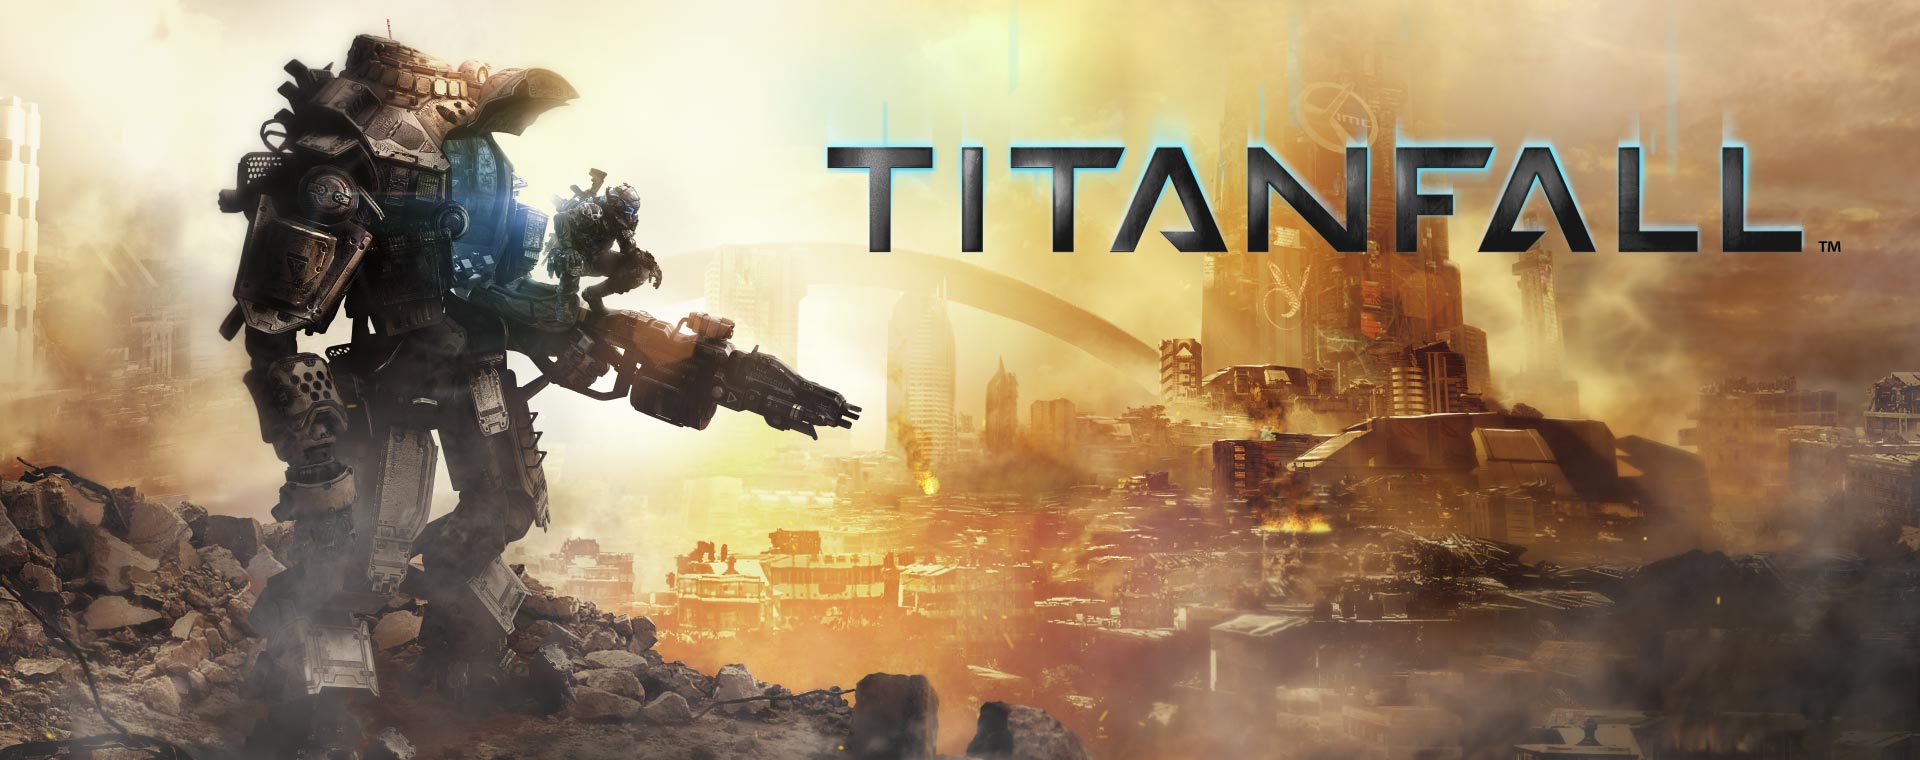 Nice Images Collection: Titanfall Desktop Wallpapers